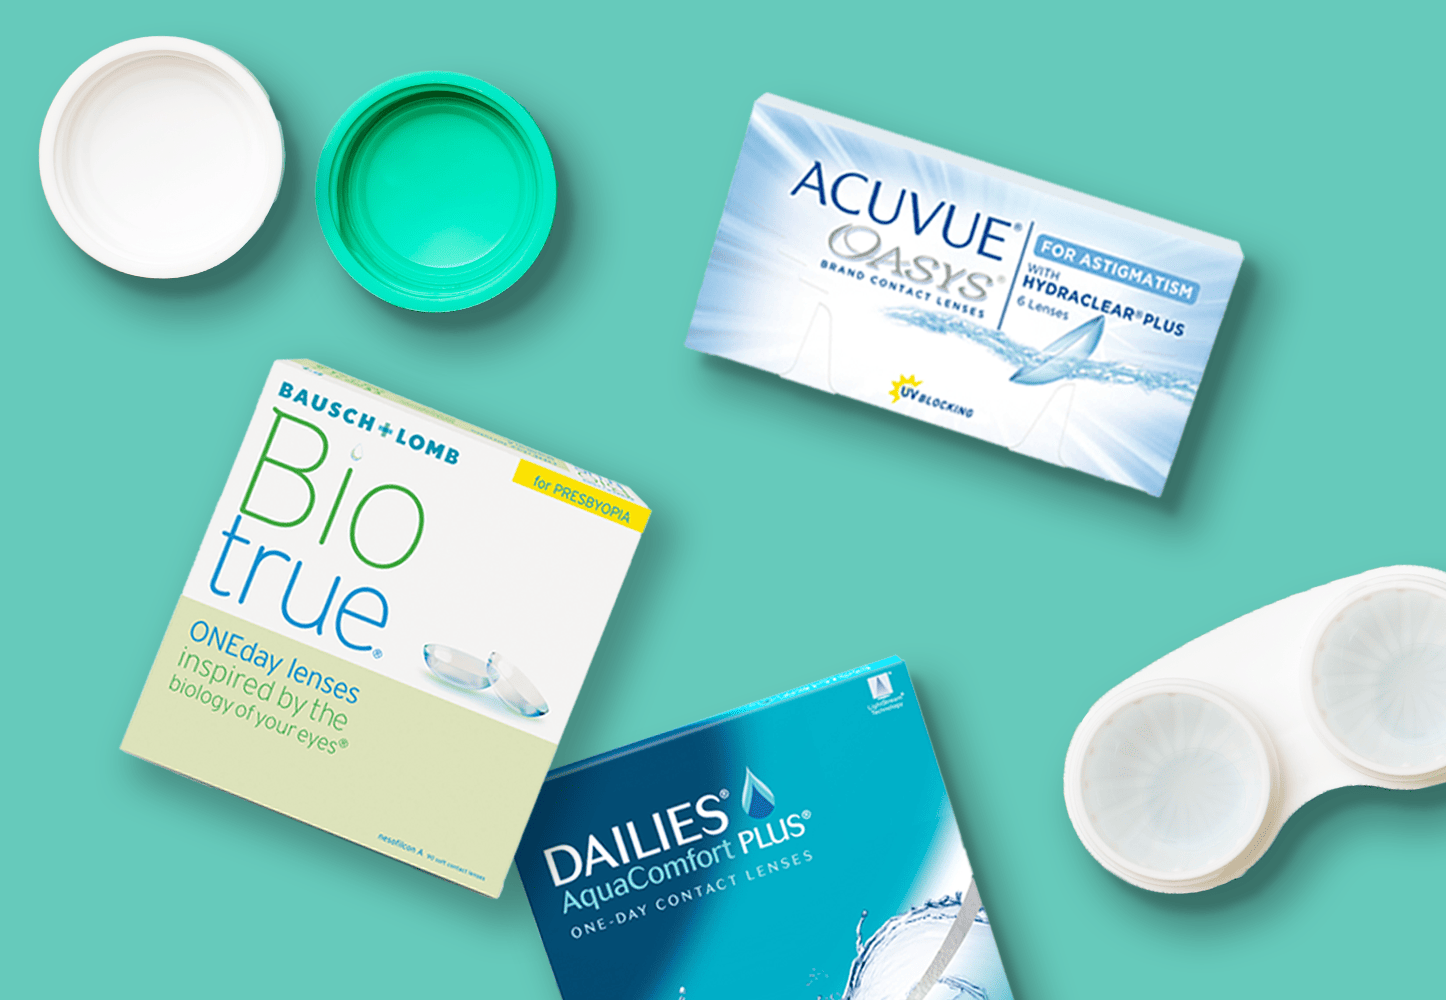 Biotrue, Acuvue and Dailies contact lenses